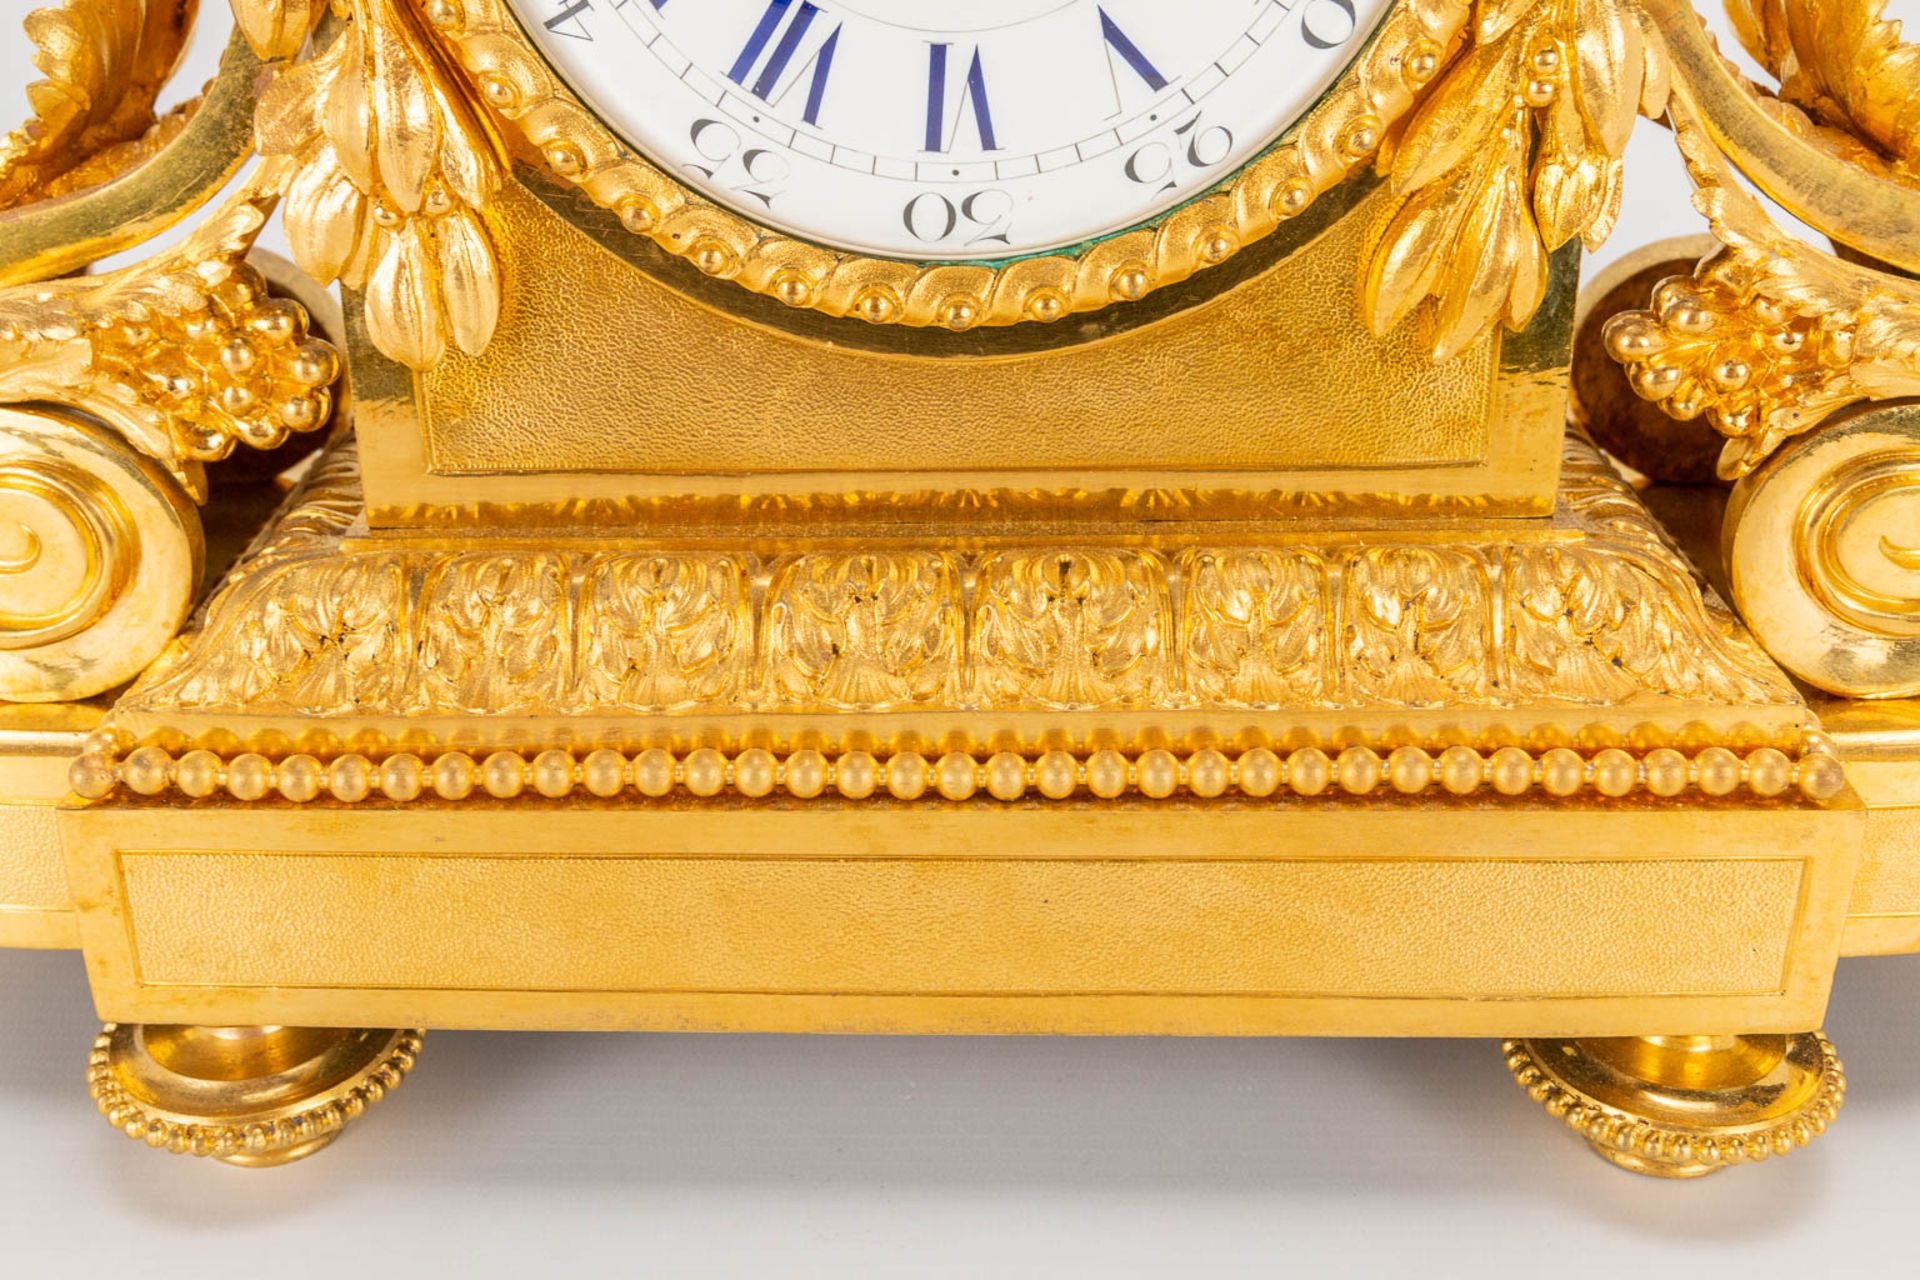 A bronze ormolu table clock made in Louis XVI style. 19th century. (15 x 41 x 42 cm) - Image 19 of 20